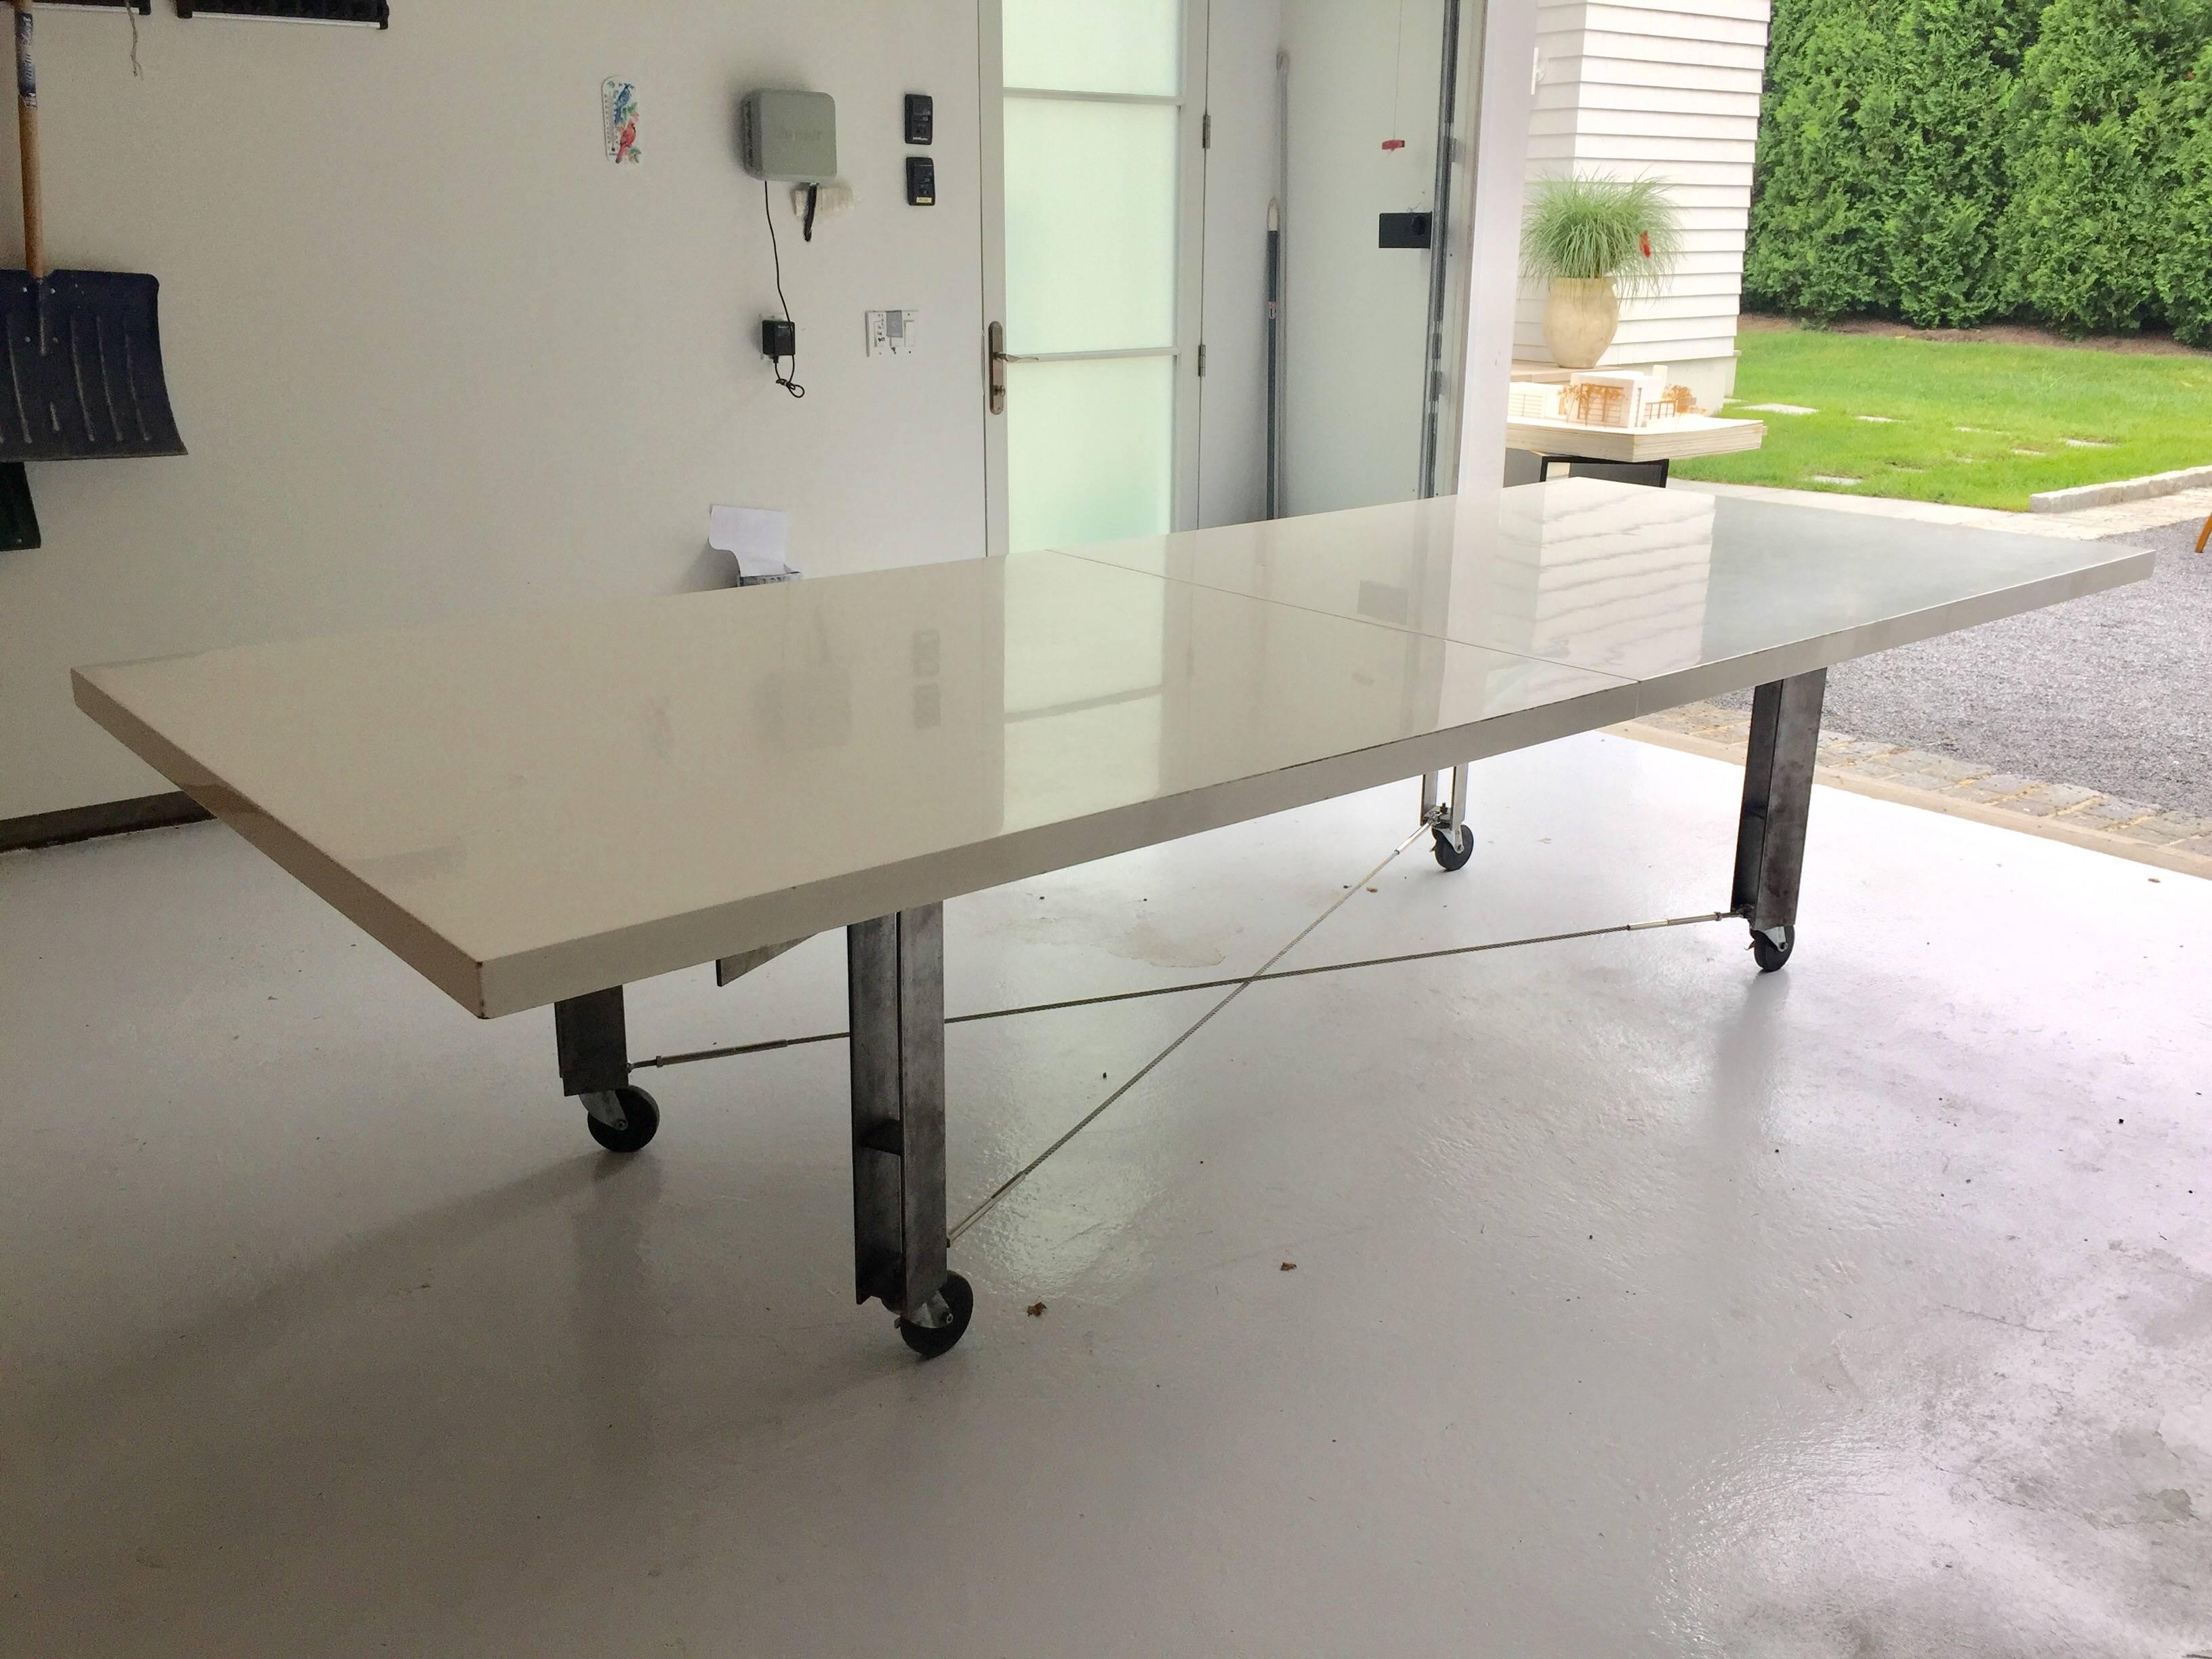 Amazing Industrial steel dining or work table; The table frame is of very high and heavy quality by renowned Architect, James D'Auria. Wheels lock to keep it in place, steel cable stretchers and lacquered top in two large sections.

James D'Auria